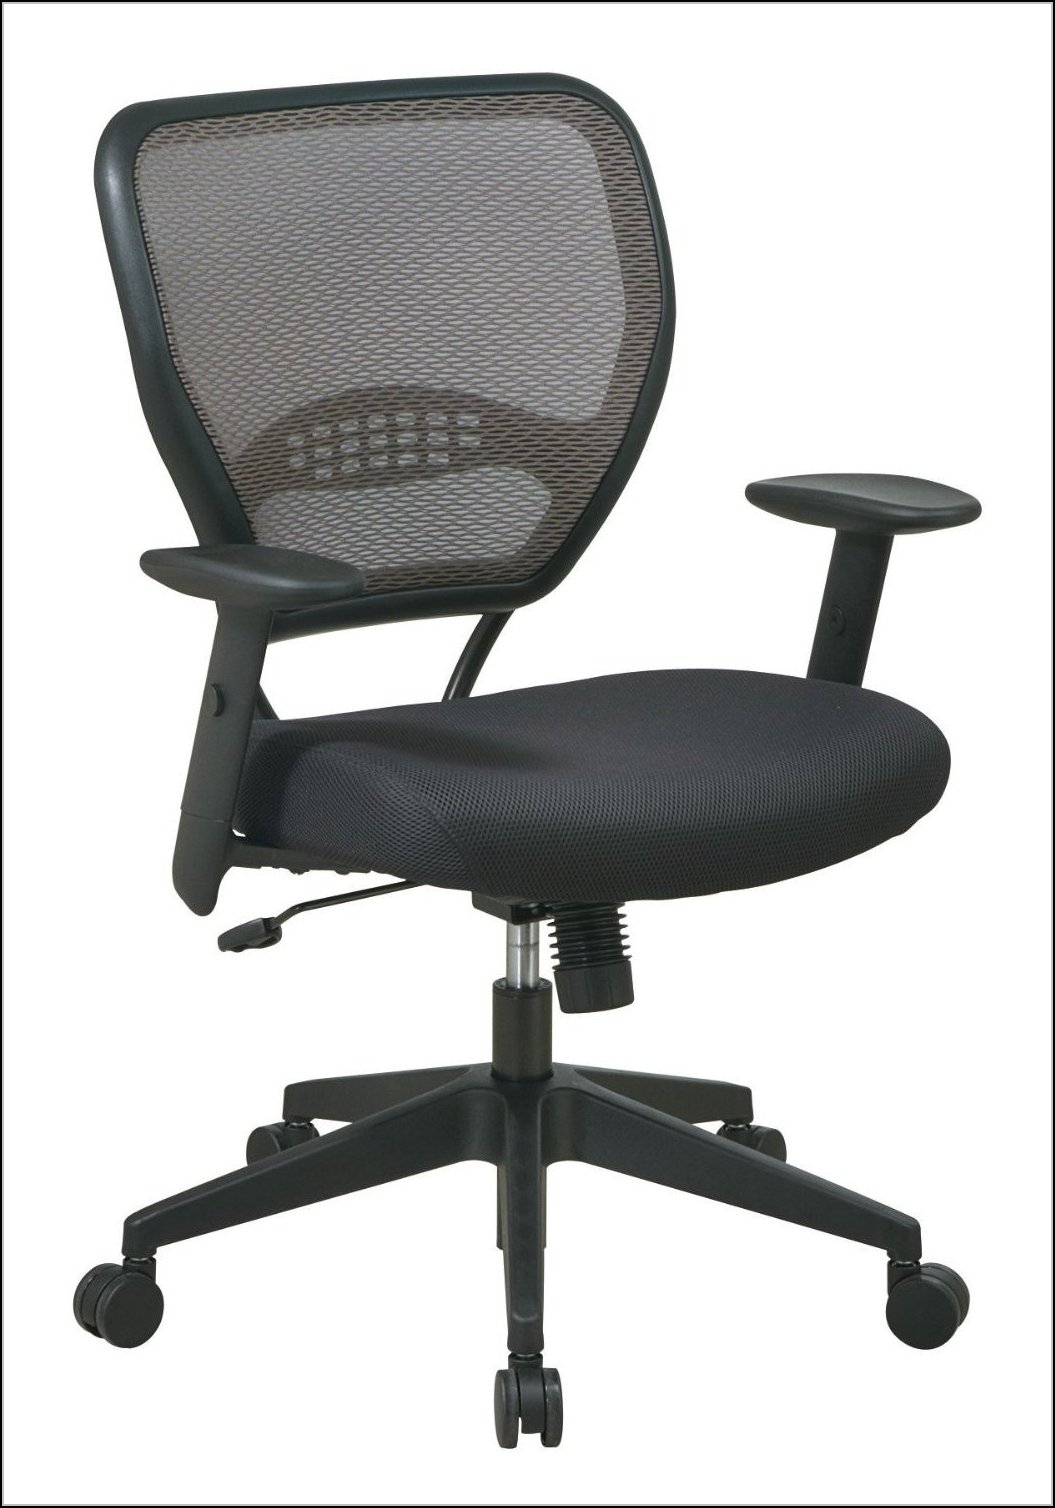 Best Office Chair For Bad Back - Chairs : Home Design Ideas #MGgQNgXPxB591